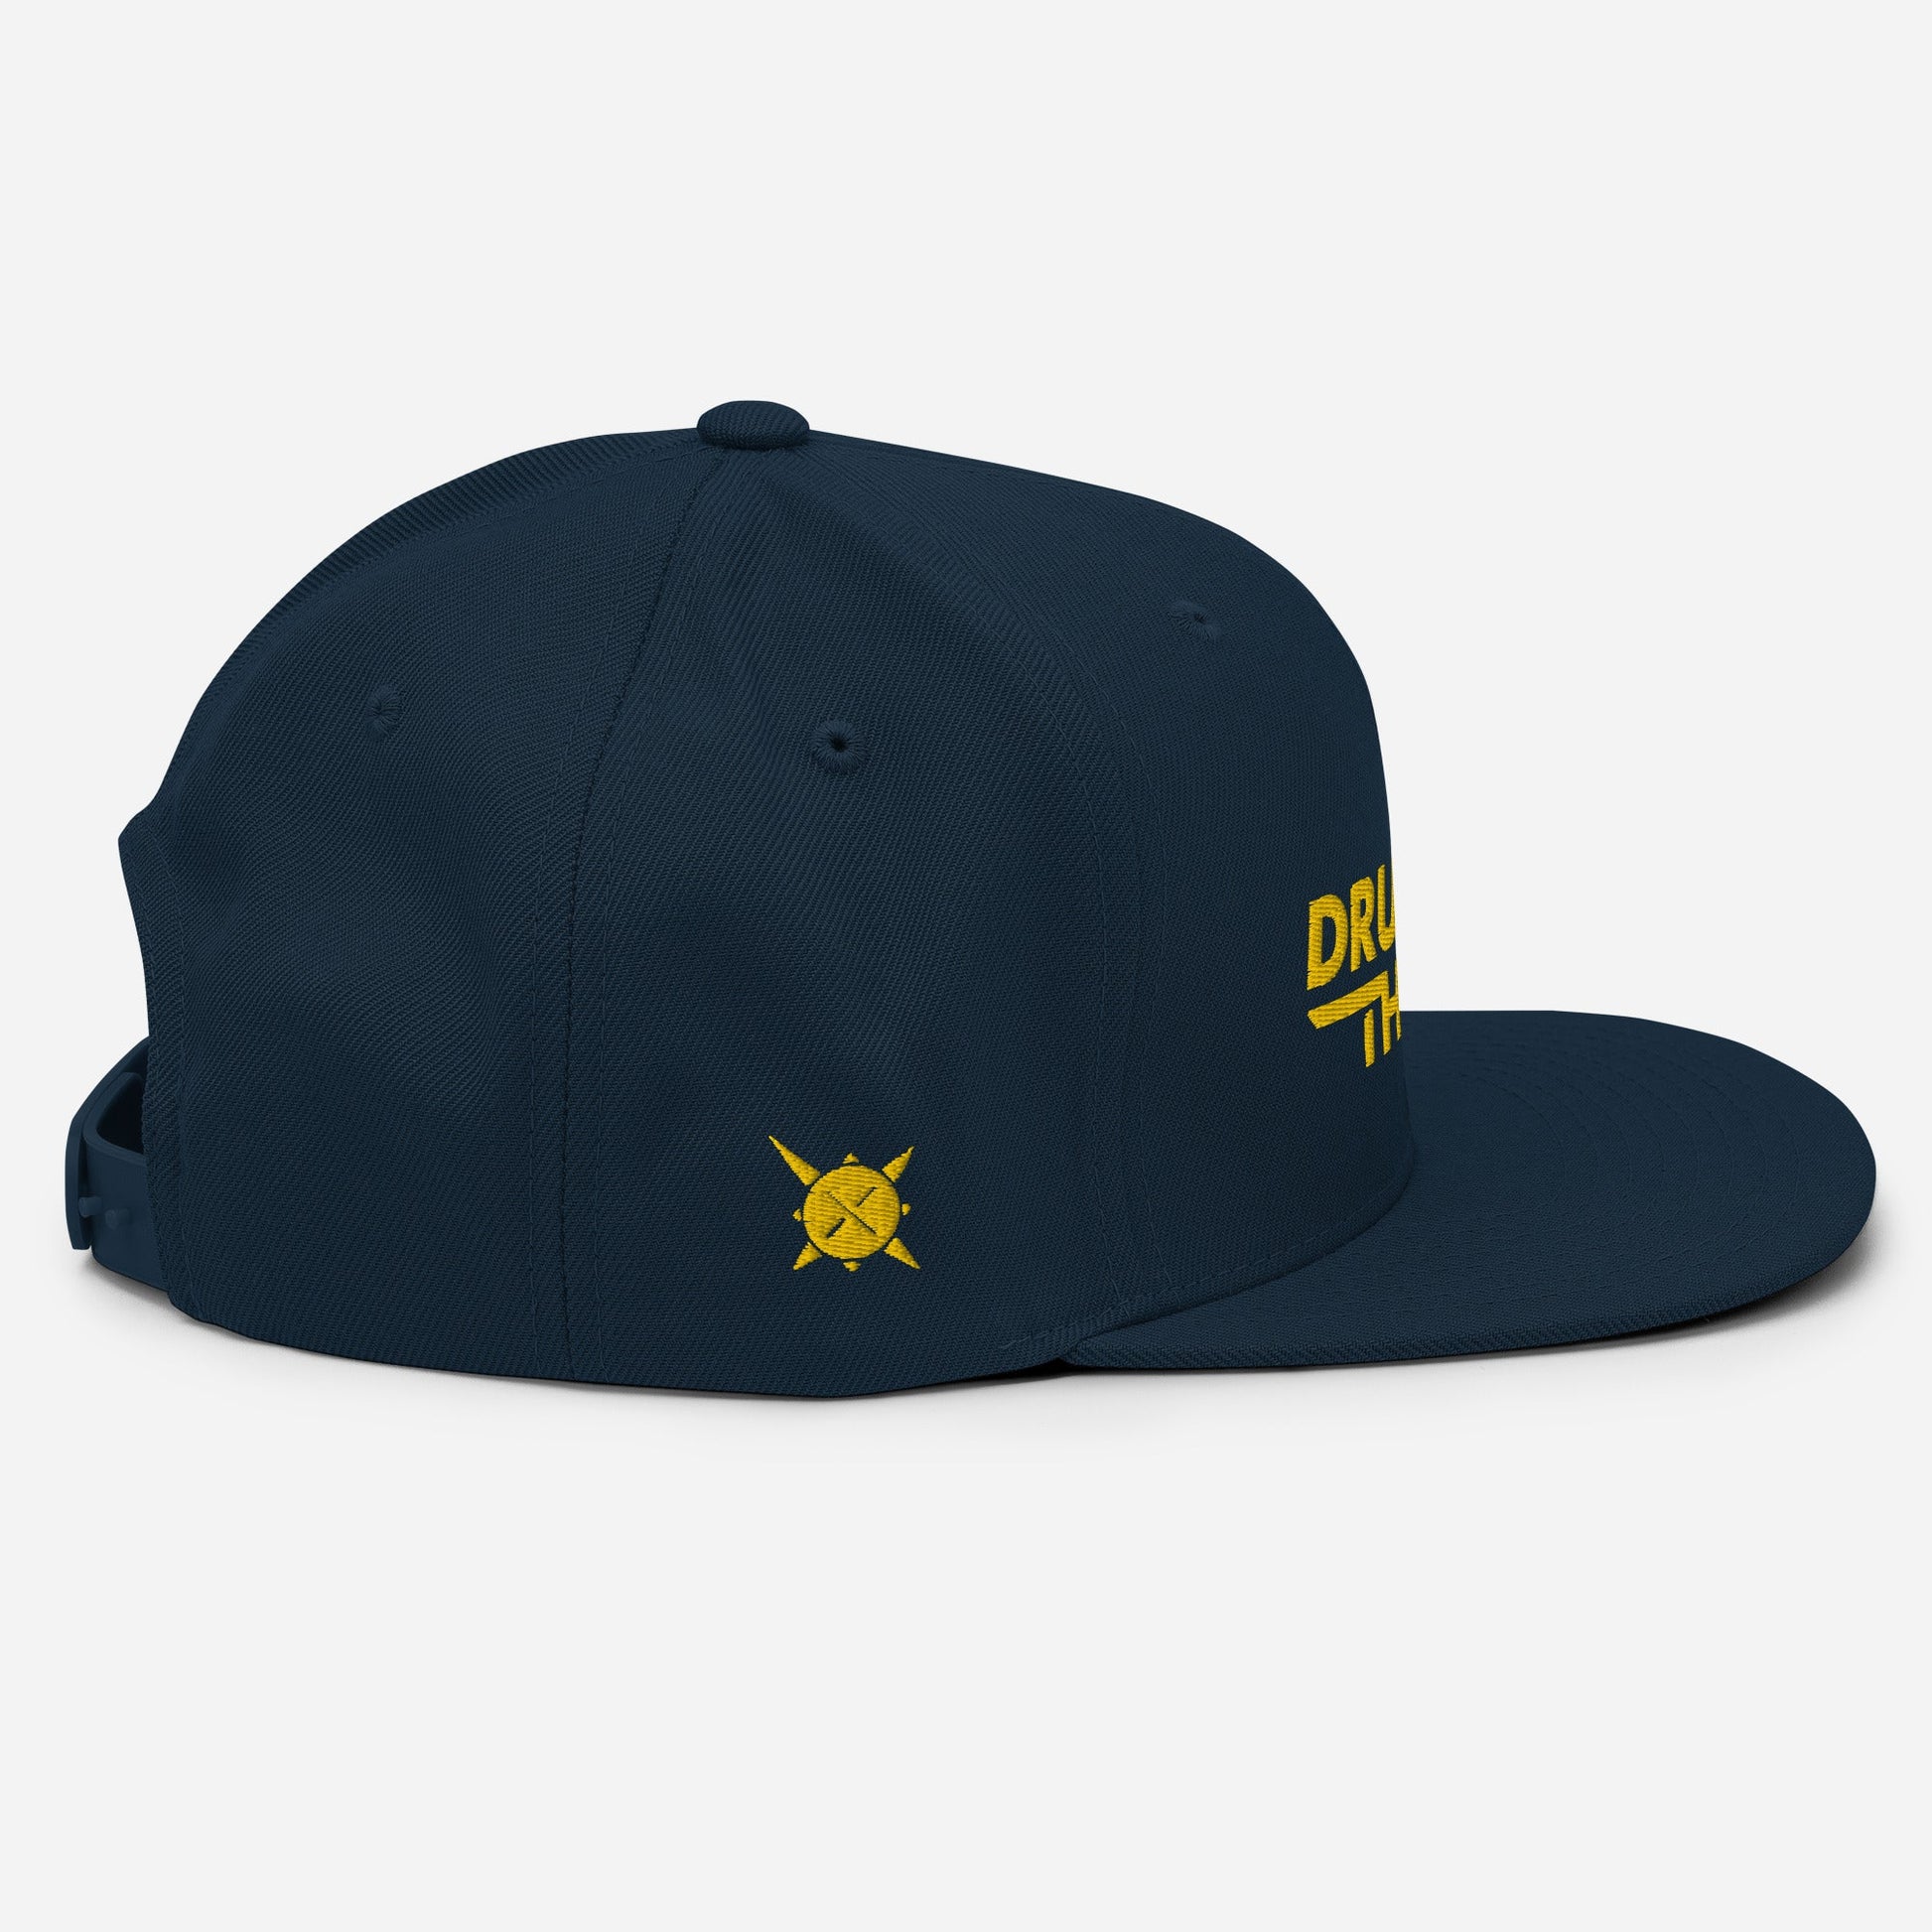 Drums of the Sun Classic Snapback Hat - BeExtra! Apparel & More